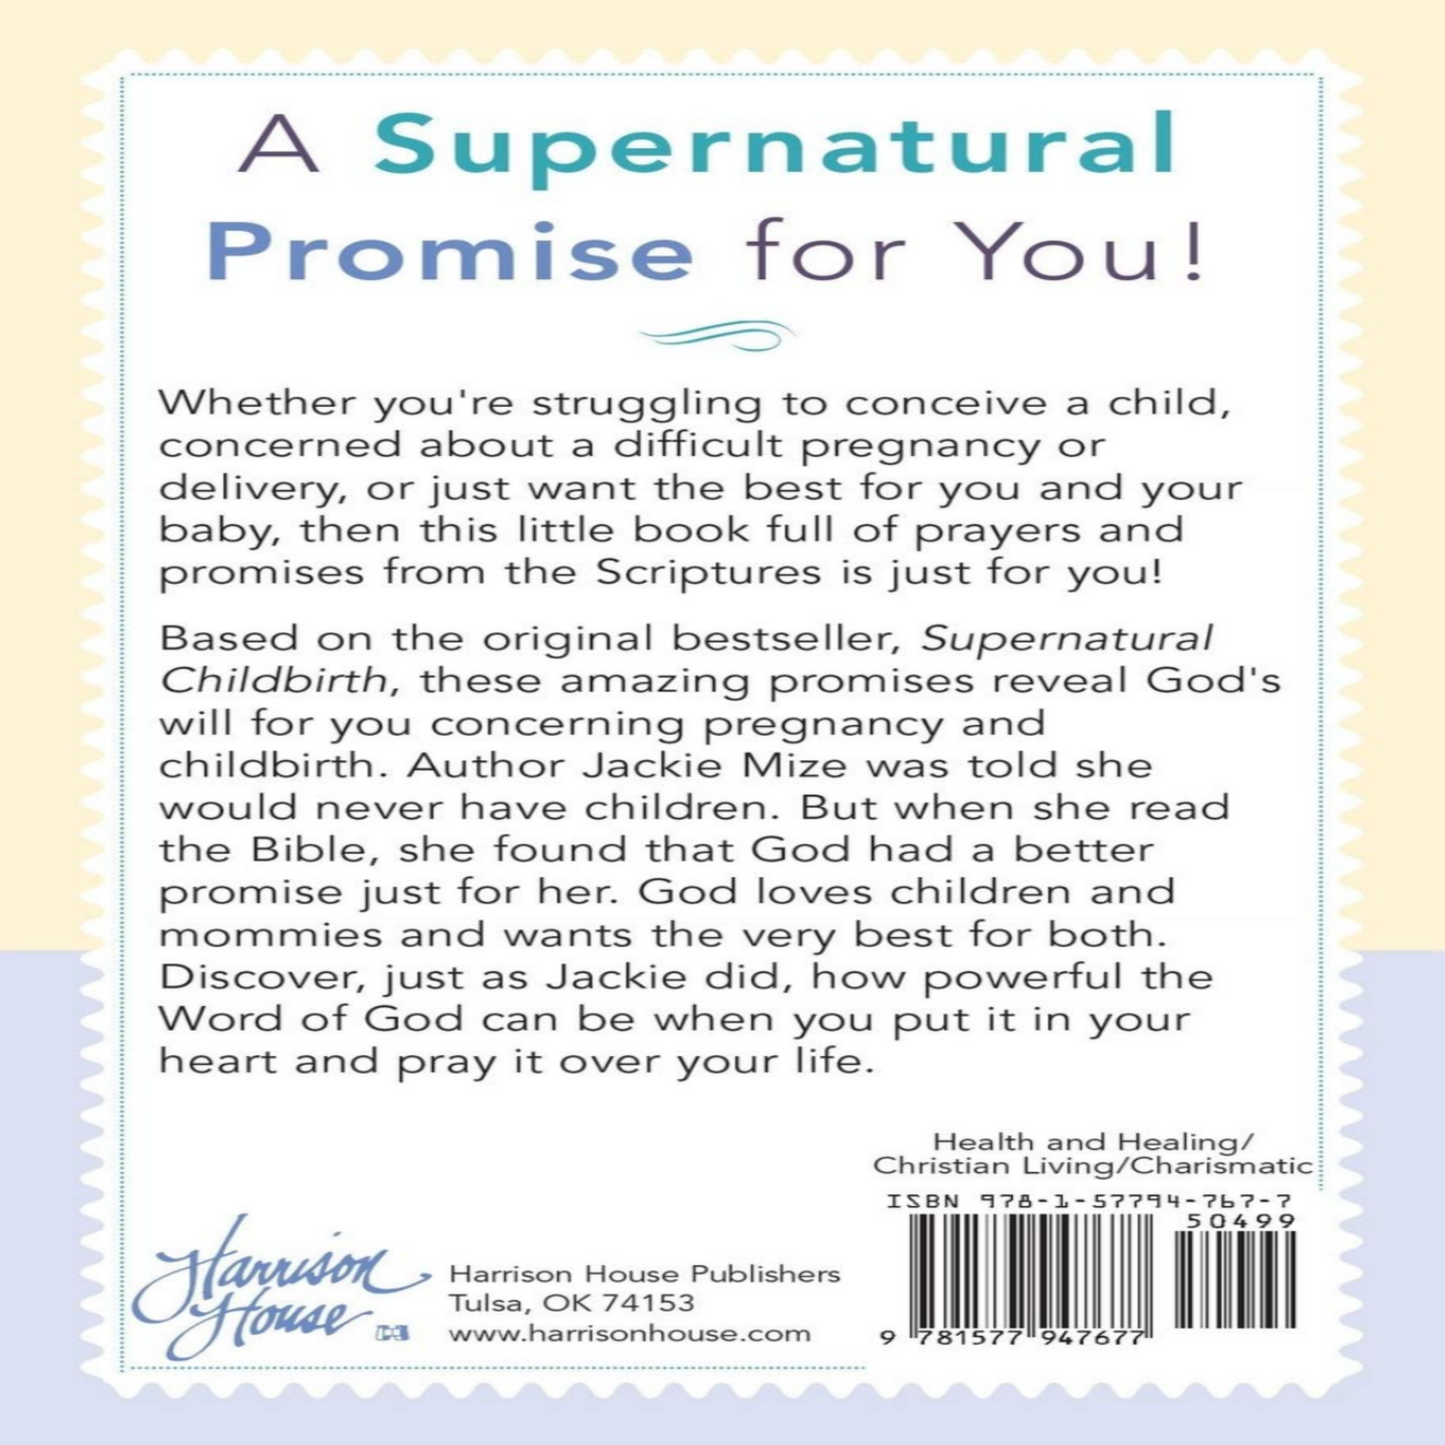 Prayers and Promises for Supernatural Childbirth - Mini Book